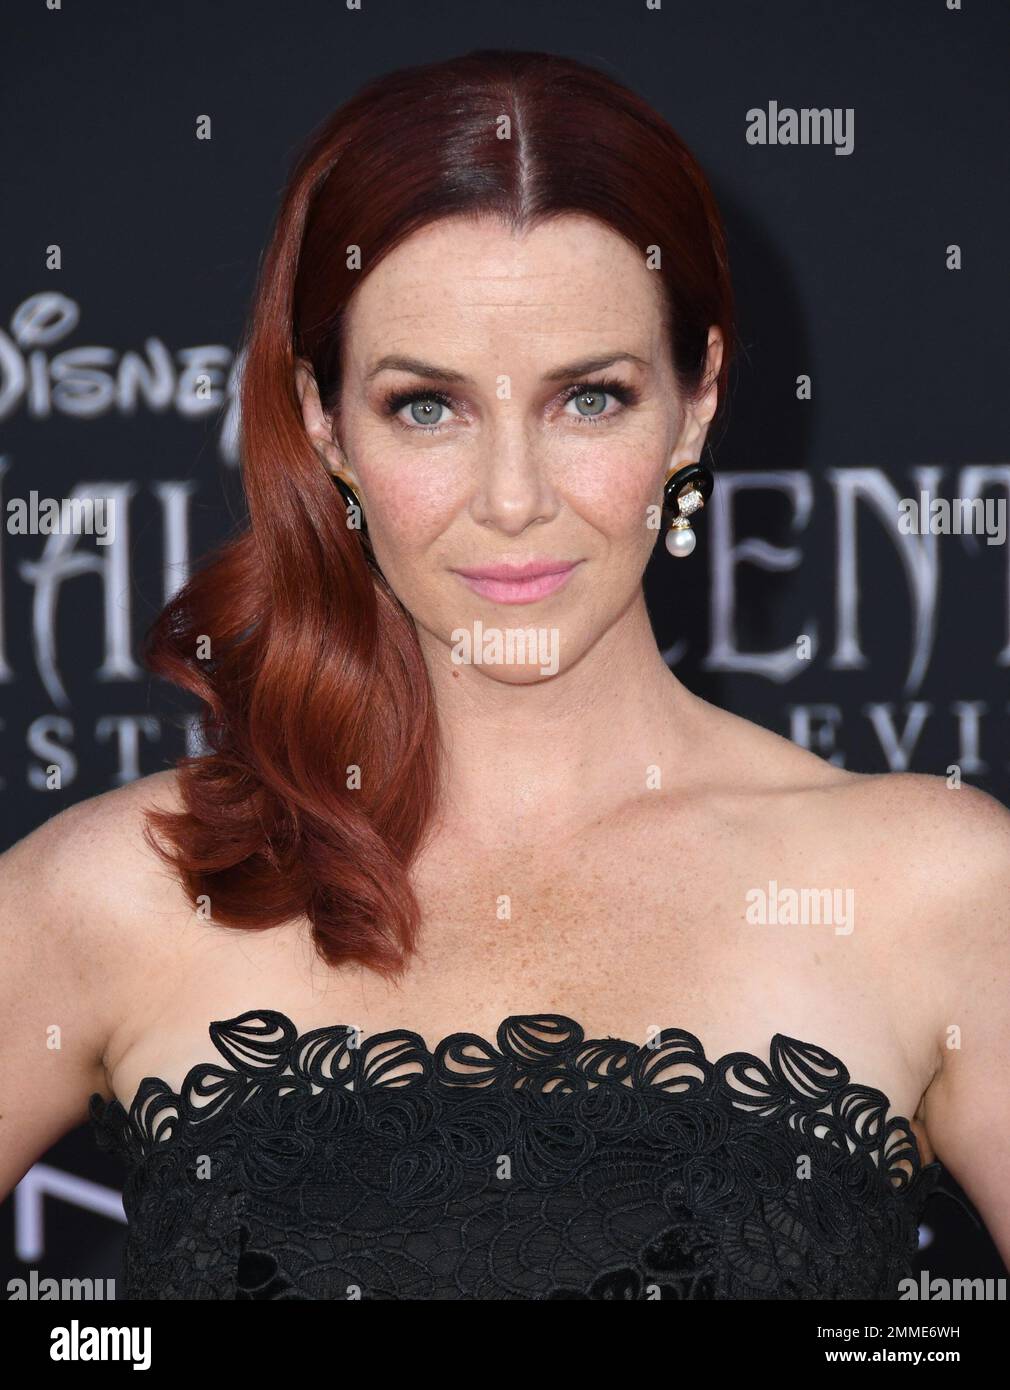 30 September 2019 - Hollywood, California - Annie Wersching. Disney's 'Maleficent: Mistress of Evil' Los Angeles Premiere held at The El Capitan Theatre. Photo Credit: Birdie Thompson/AdMedia /MediaPunch Stock Photo